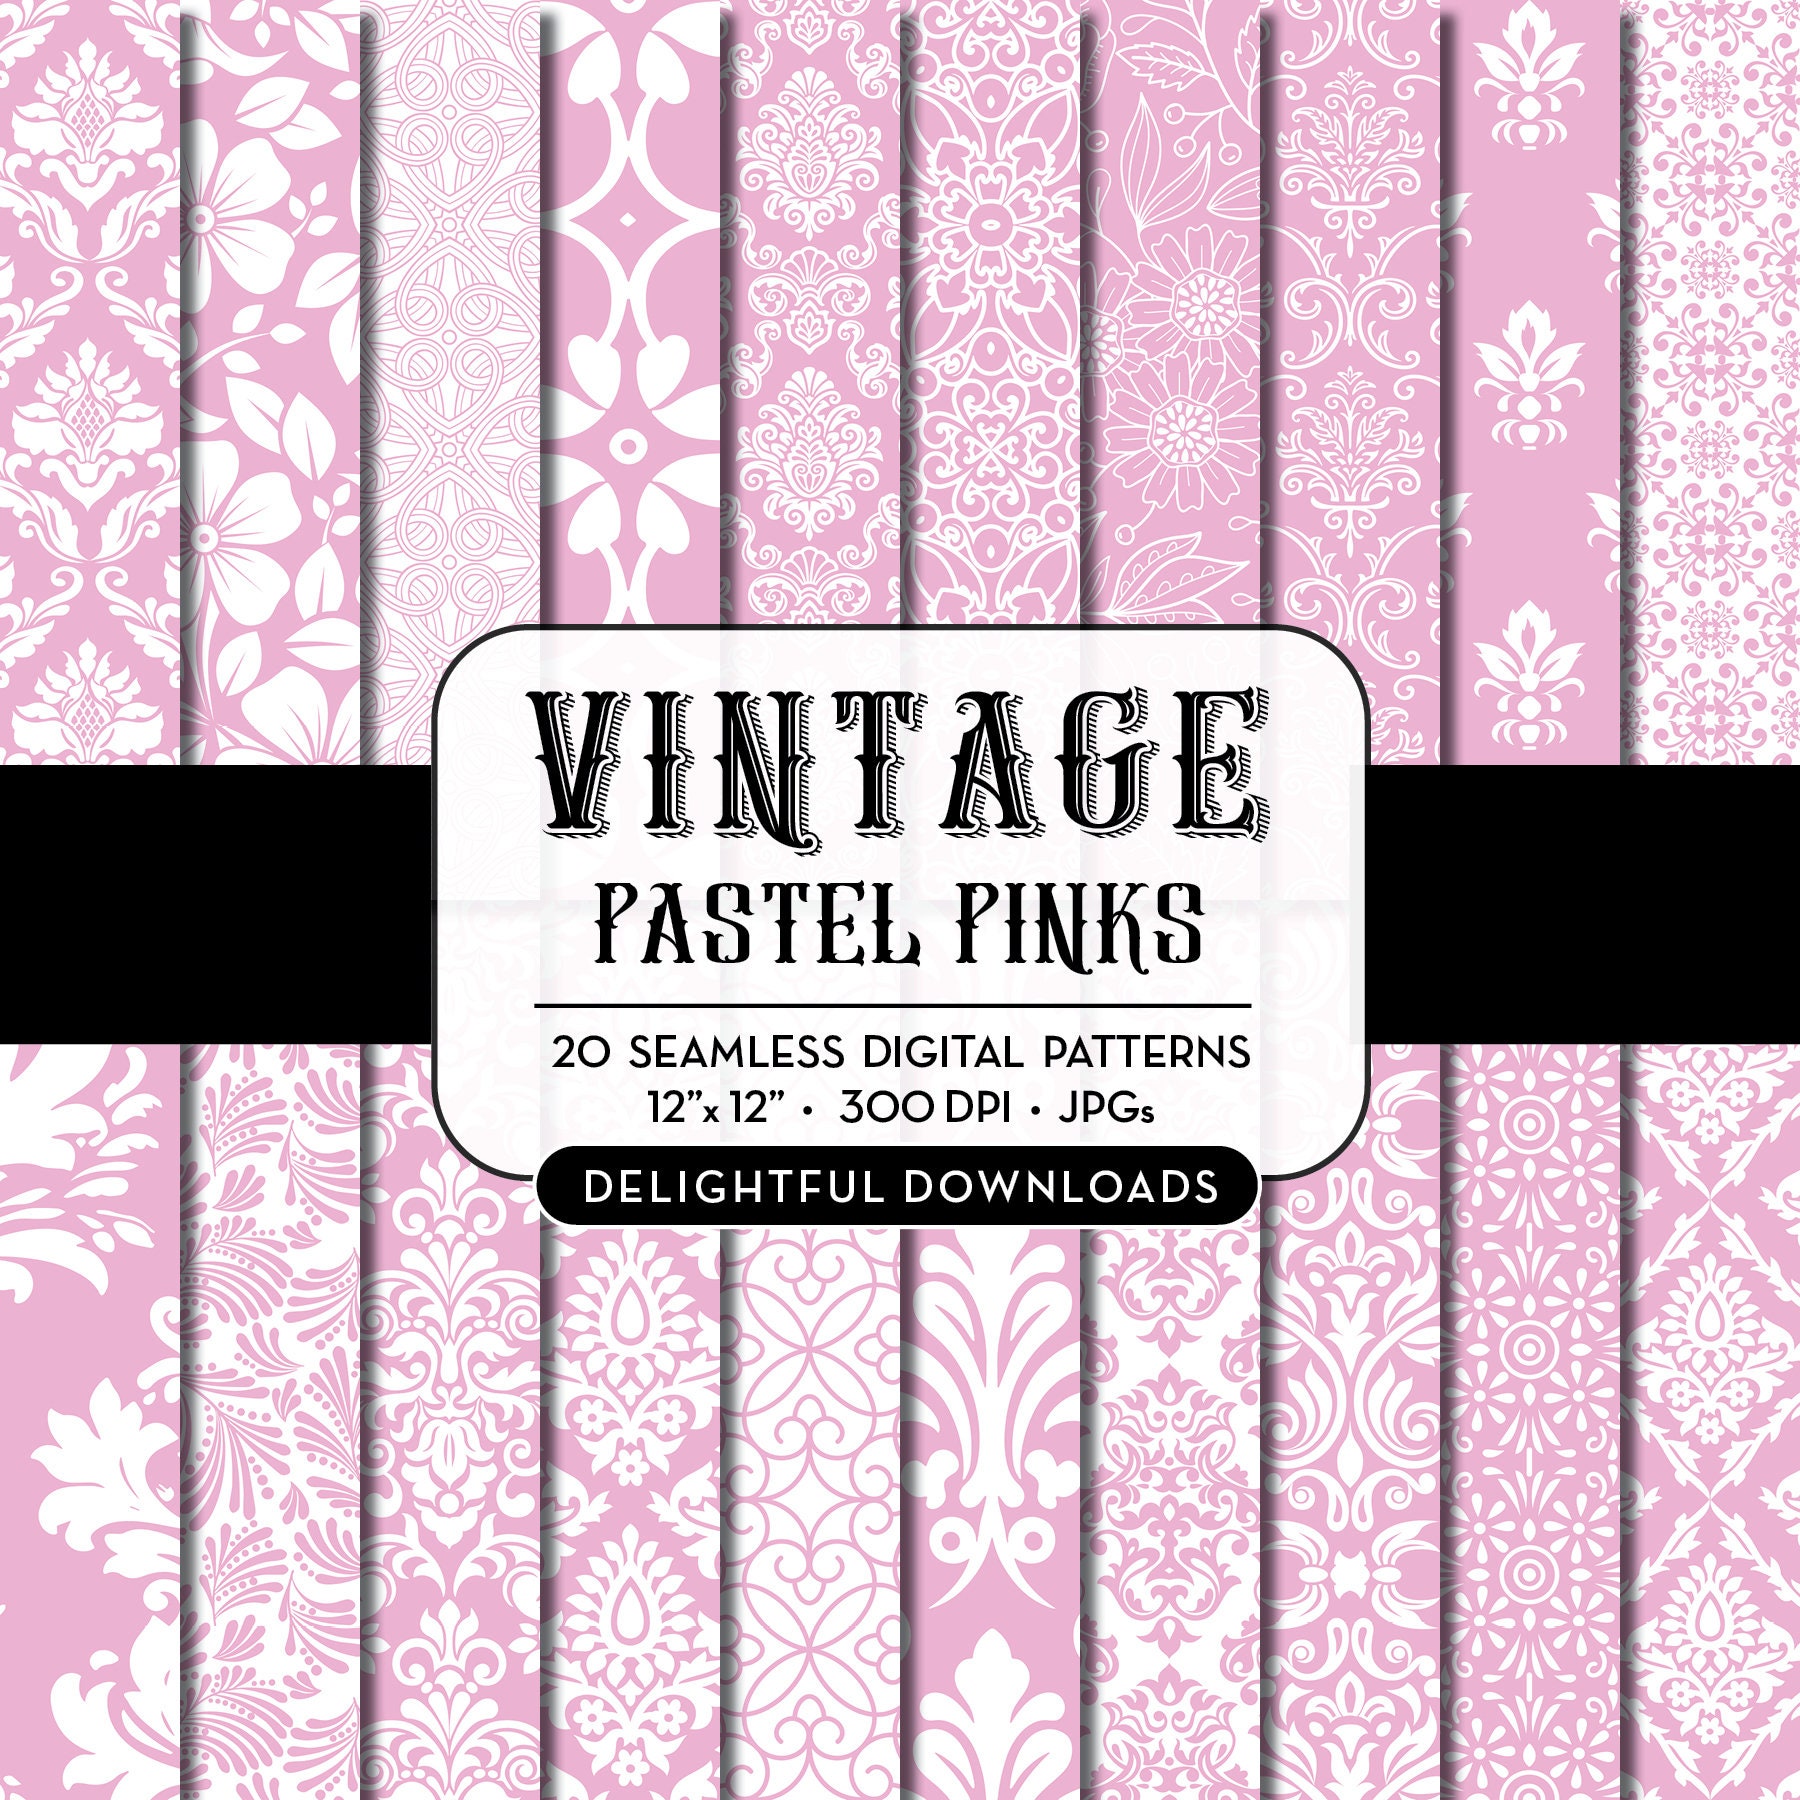 Hot Pink Digital Paper Pack Hot Pink Scrapbook Paper Commercial Use  Backgrounds: Hot Pink Chevron, Polkadots, Stripes, Stars, Gingham 